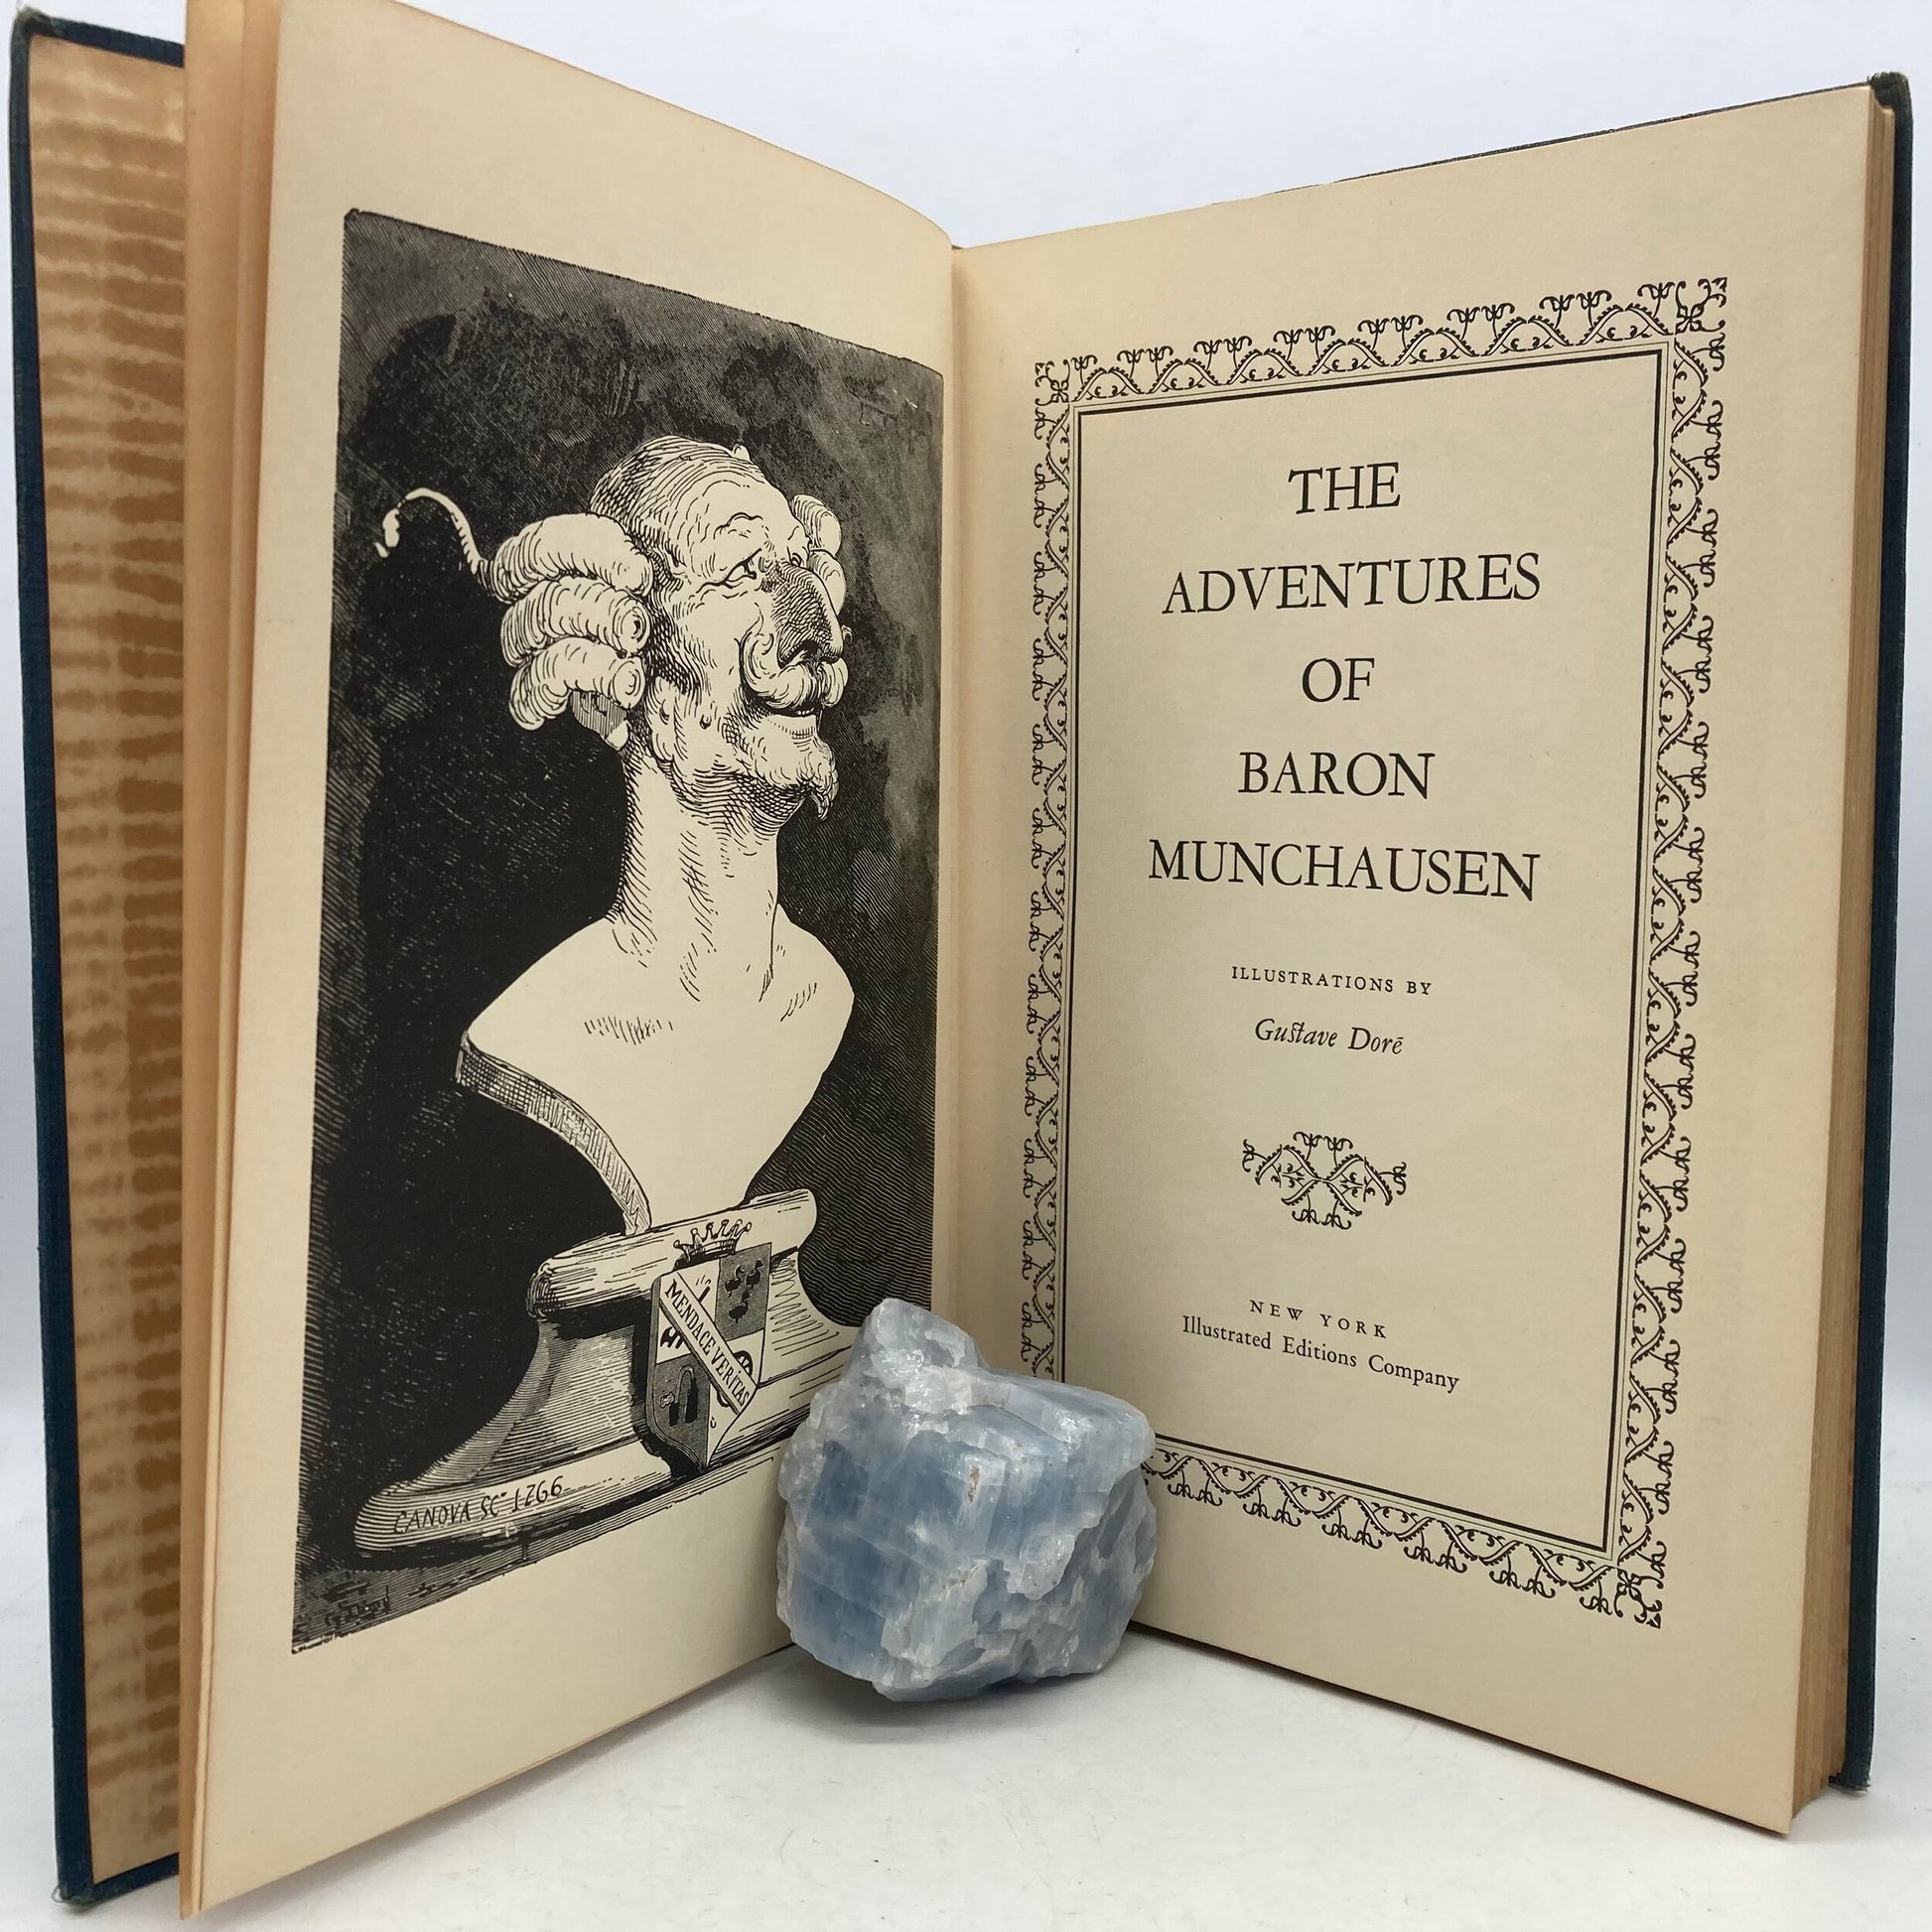 "The Adventures of Baron Munchausen" [Illustrated Editions Company, c1935] - Buzz Bookstore